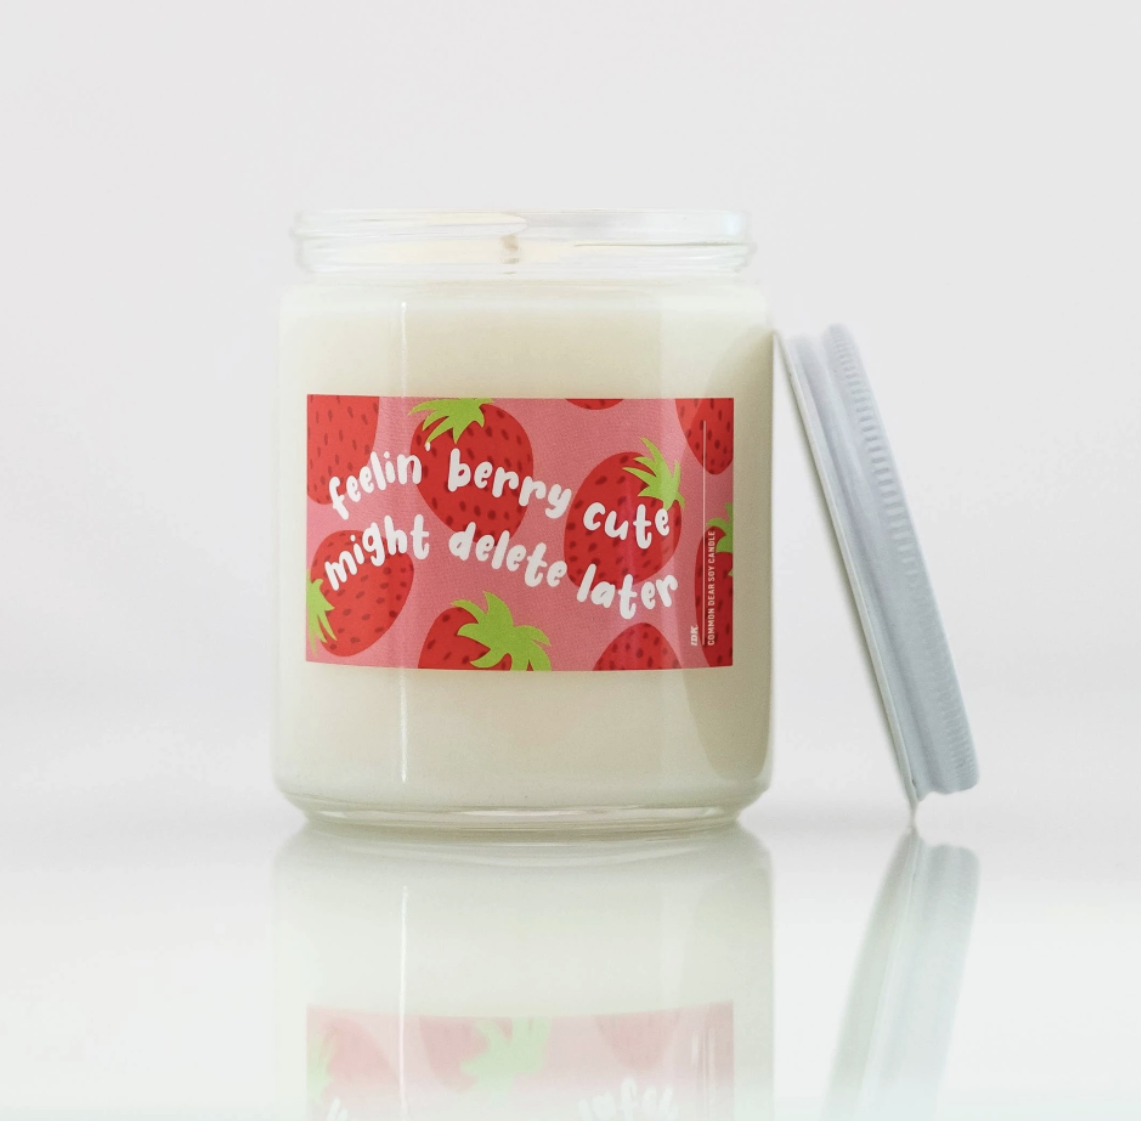 candle that says &quot;feelin berry cute might delete later&quot;